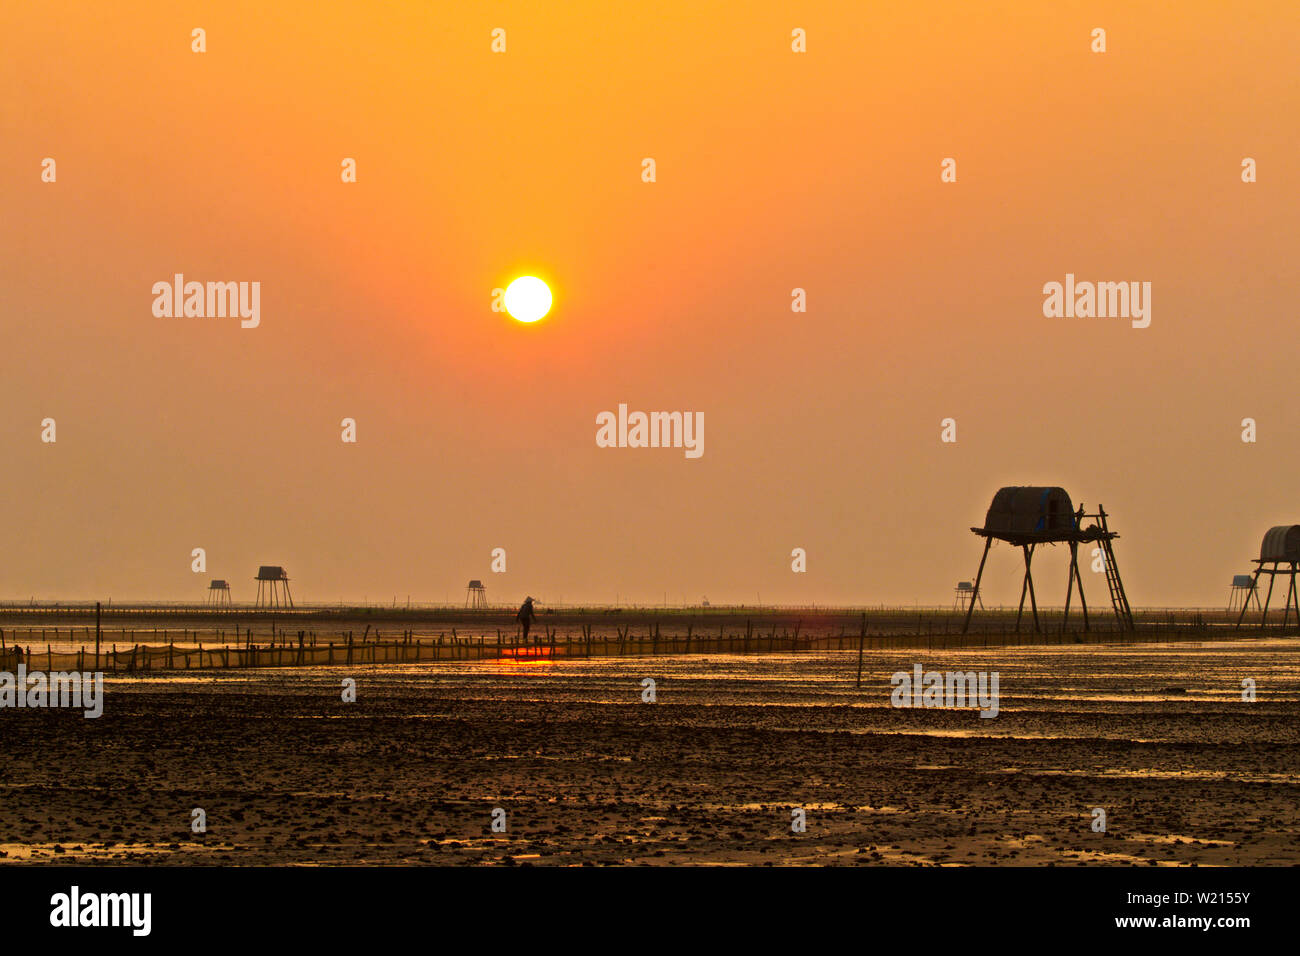 Sunset over Dong Chau beach in Thai Binh, Vietnam. This is a large farm for aquaculture, especially clams. Stock Photo